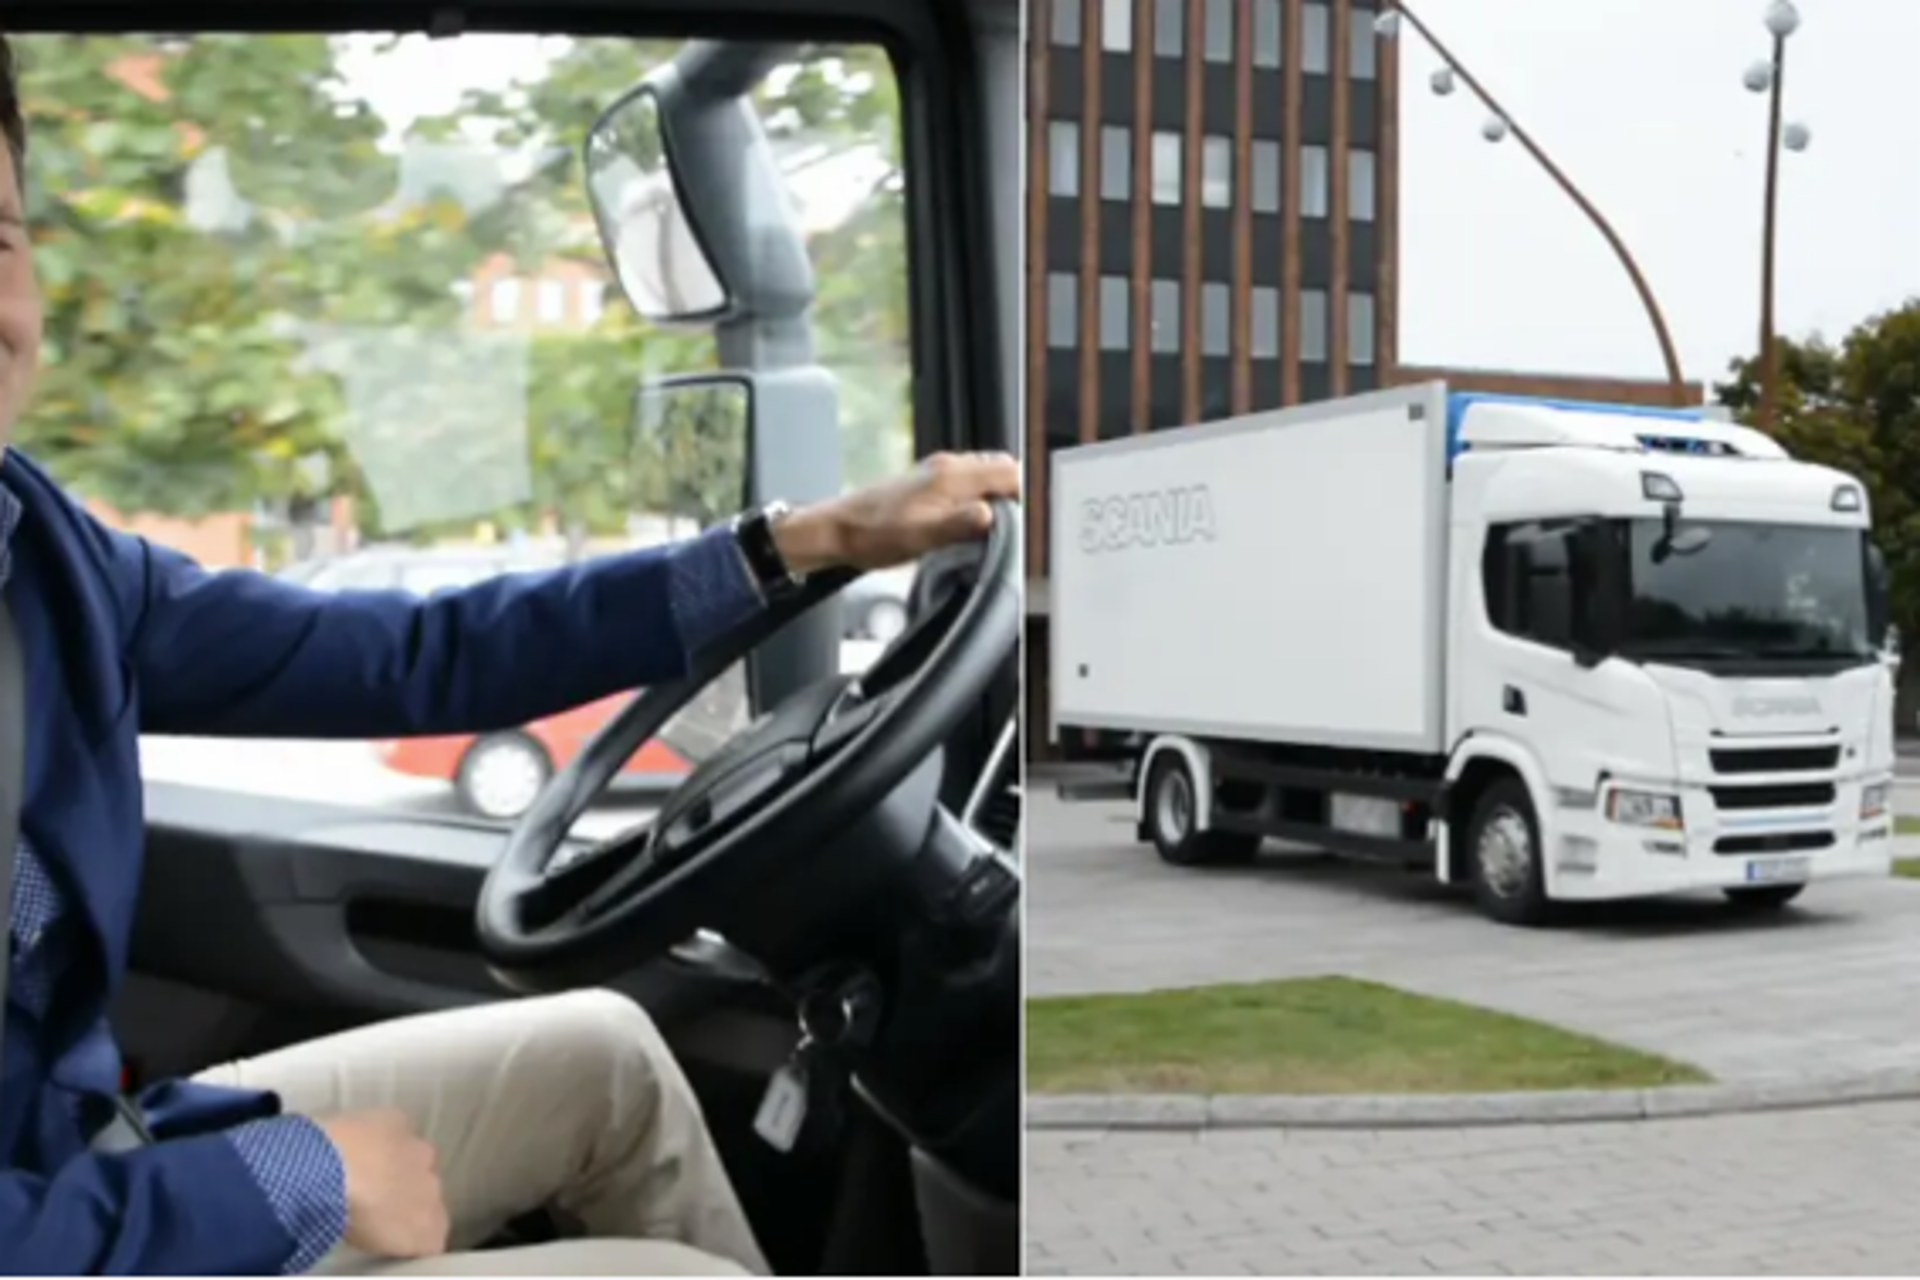 Anders Lampinen in the fully electric Scania truck